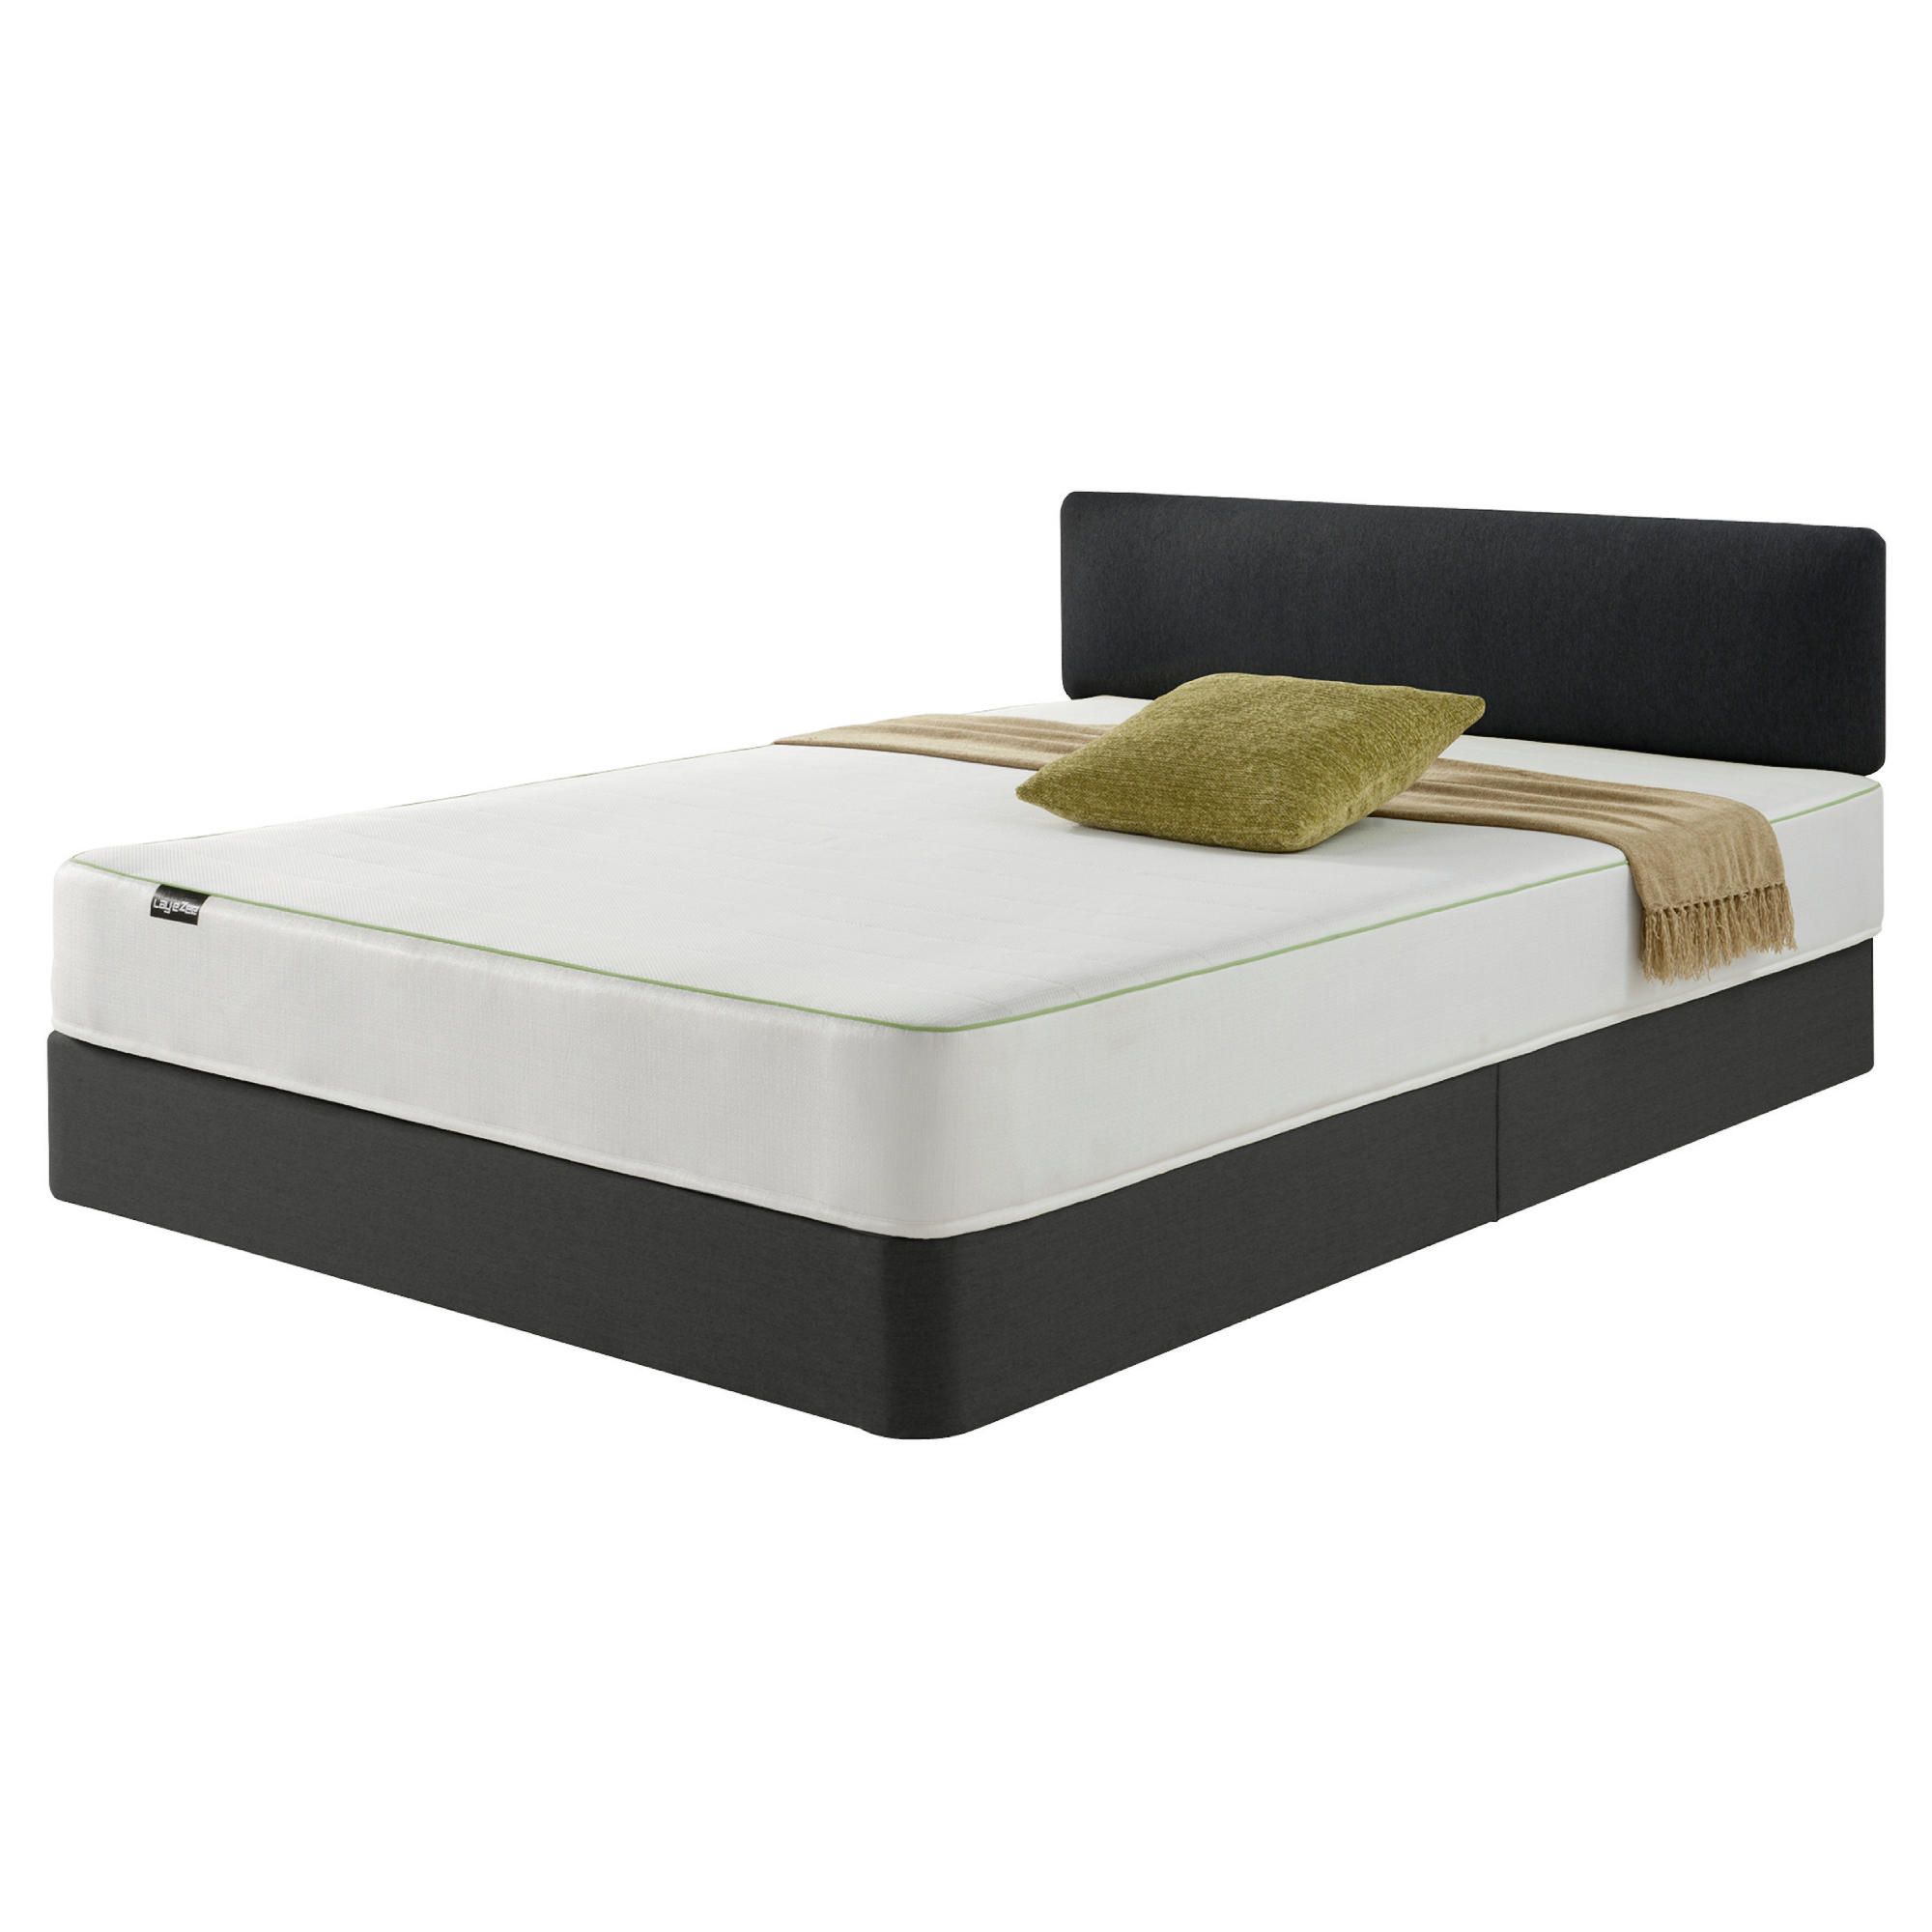 Layezee Charcoal Bed and Headboard Standard Mattress Small Double at Tesco Direct